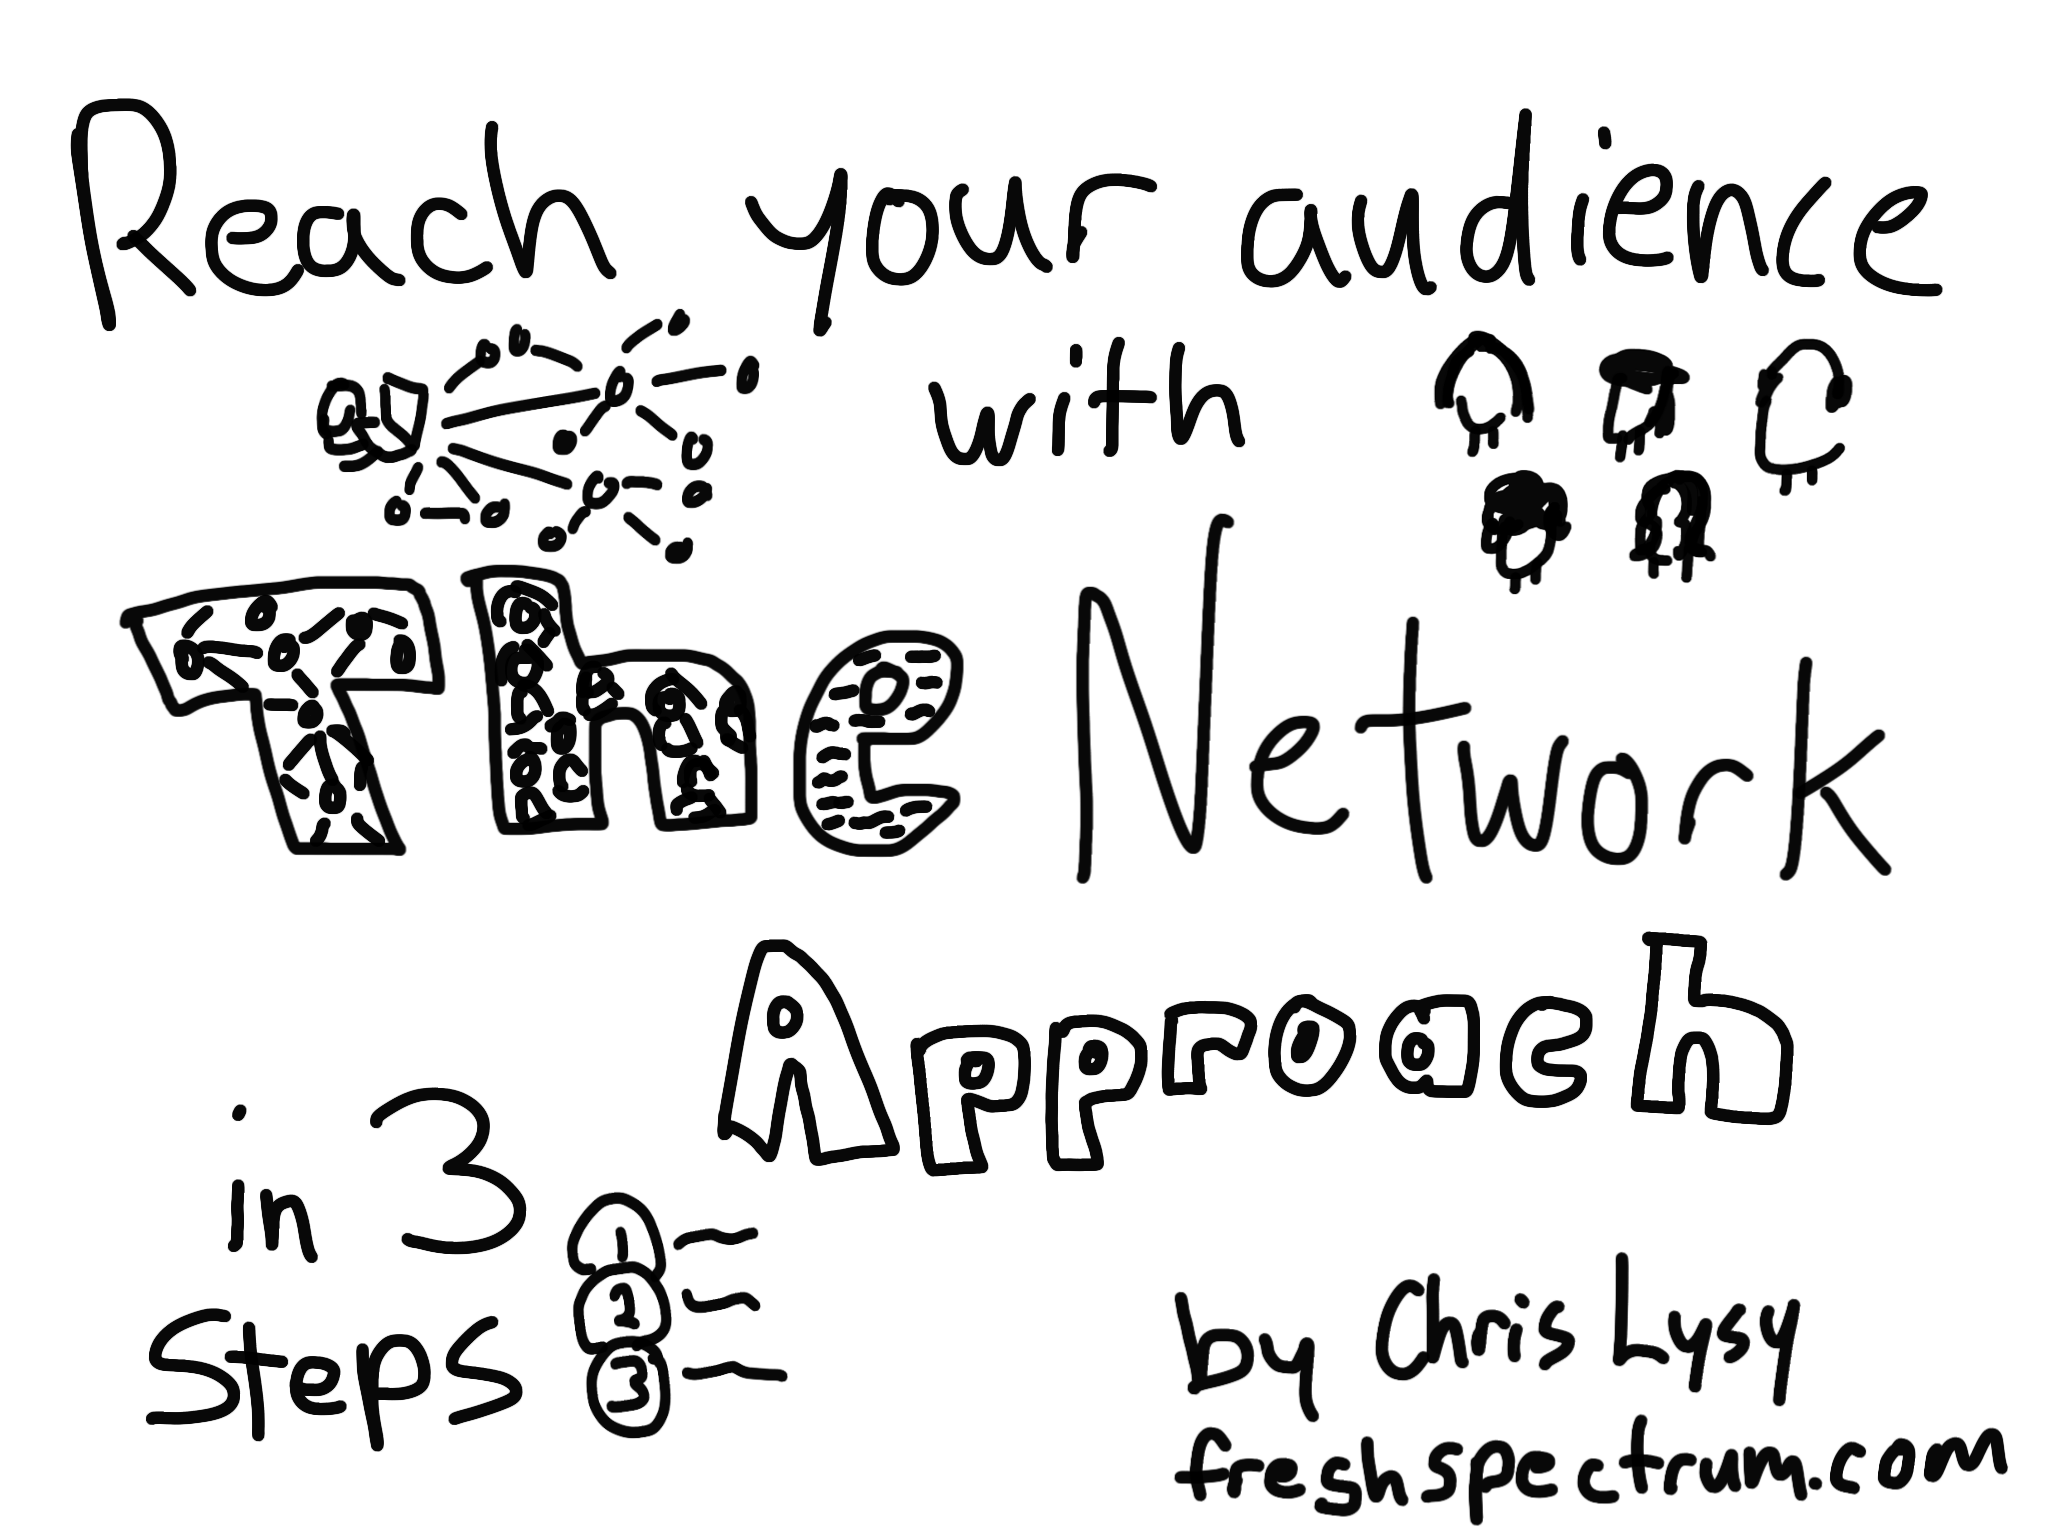 Reaching an audience without building an audience